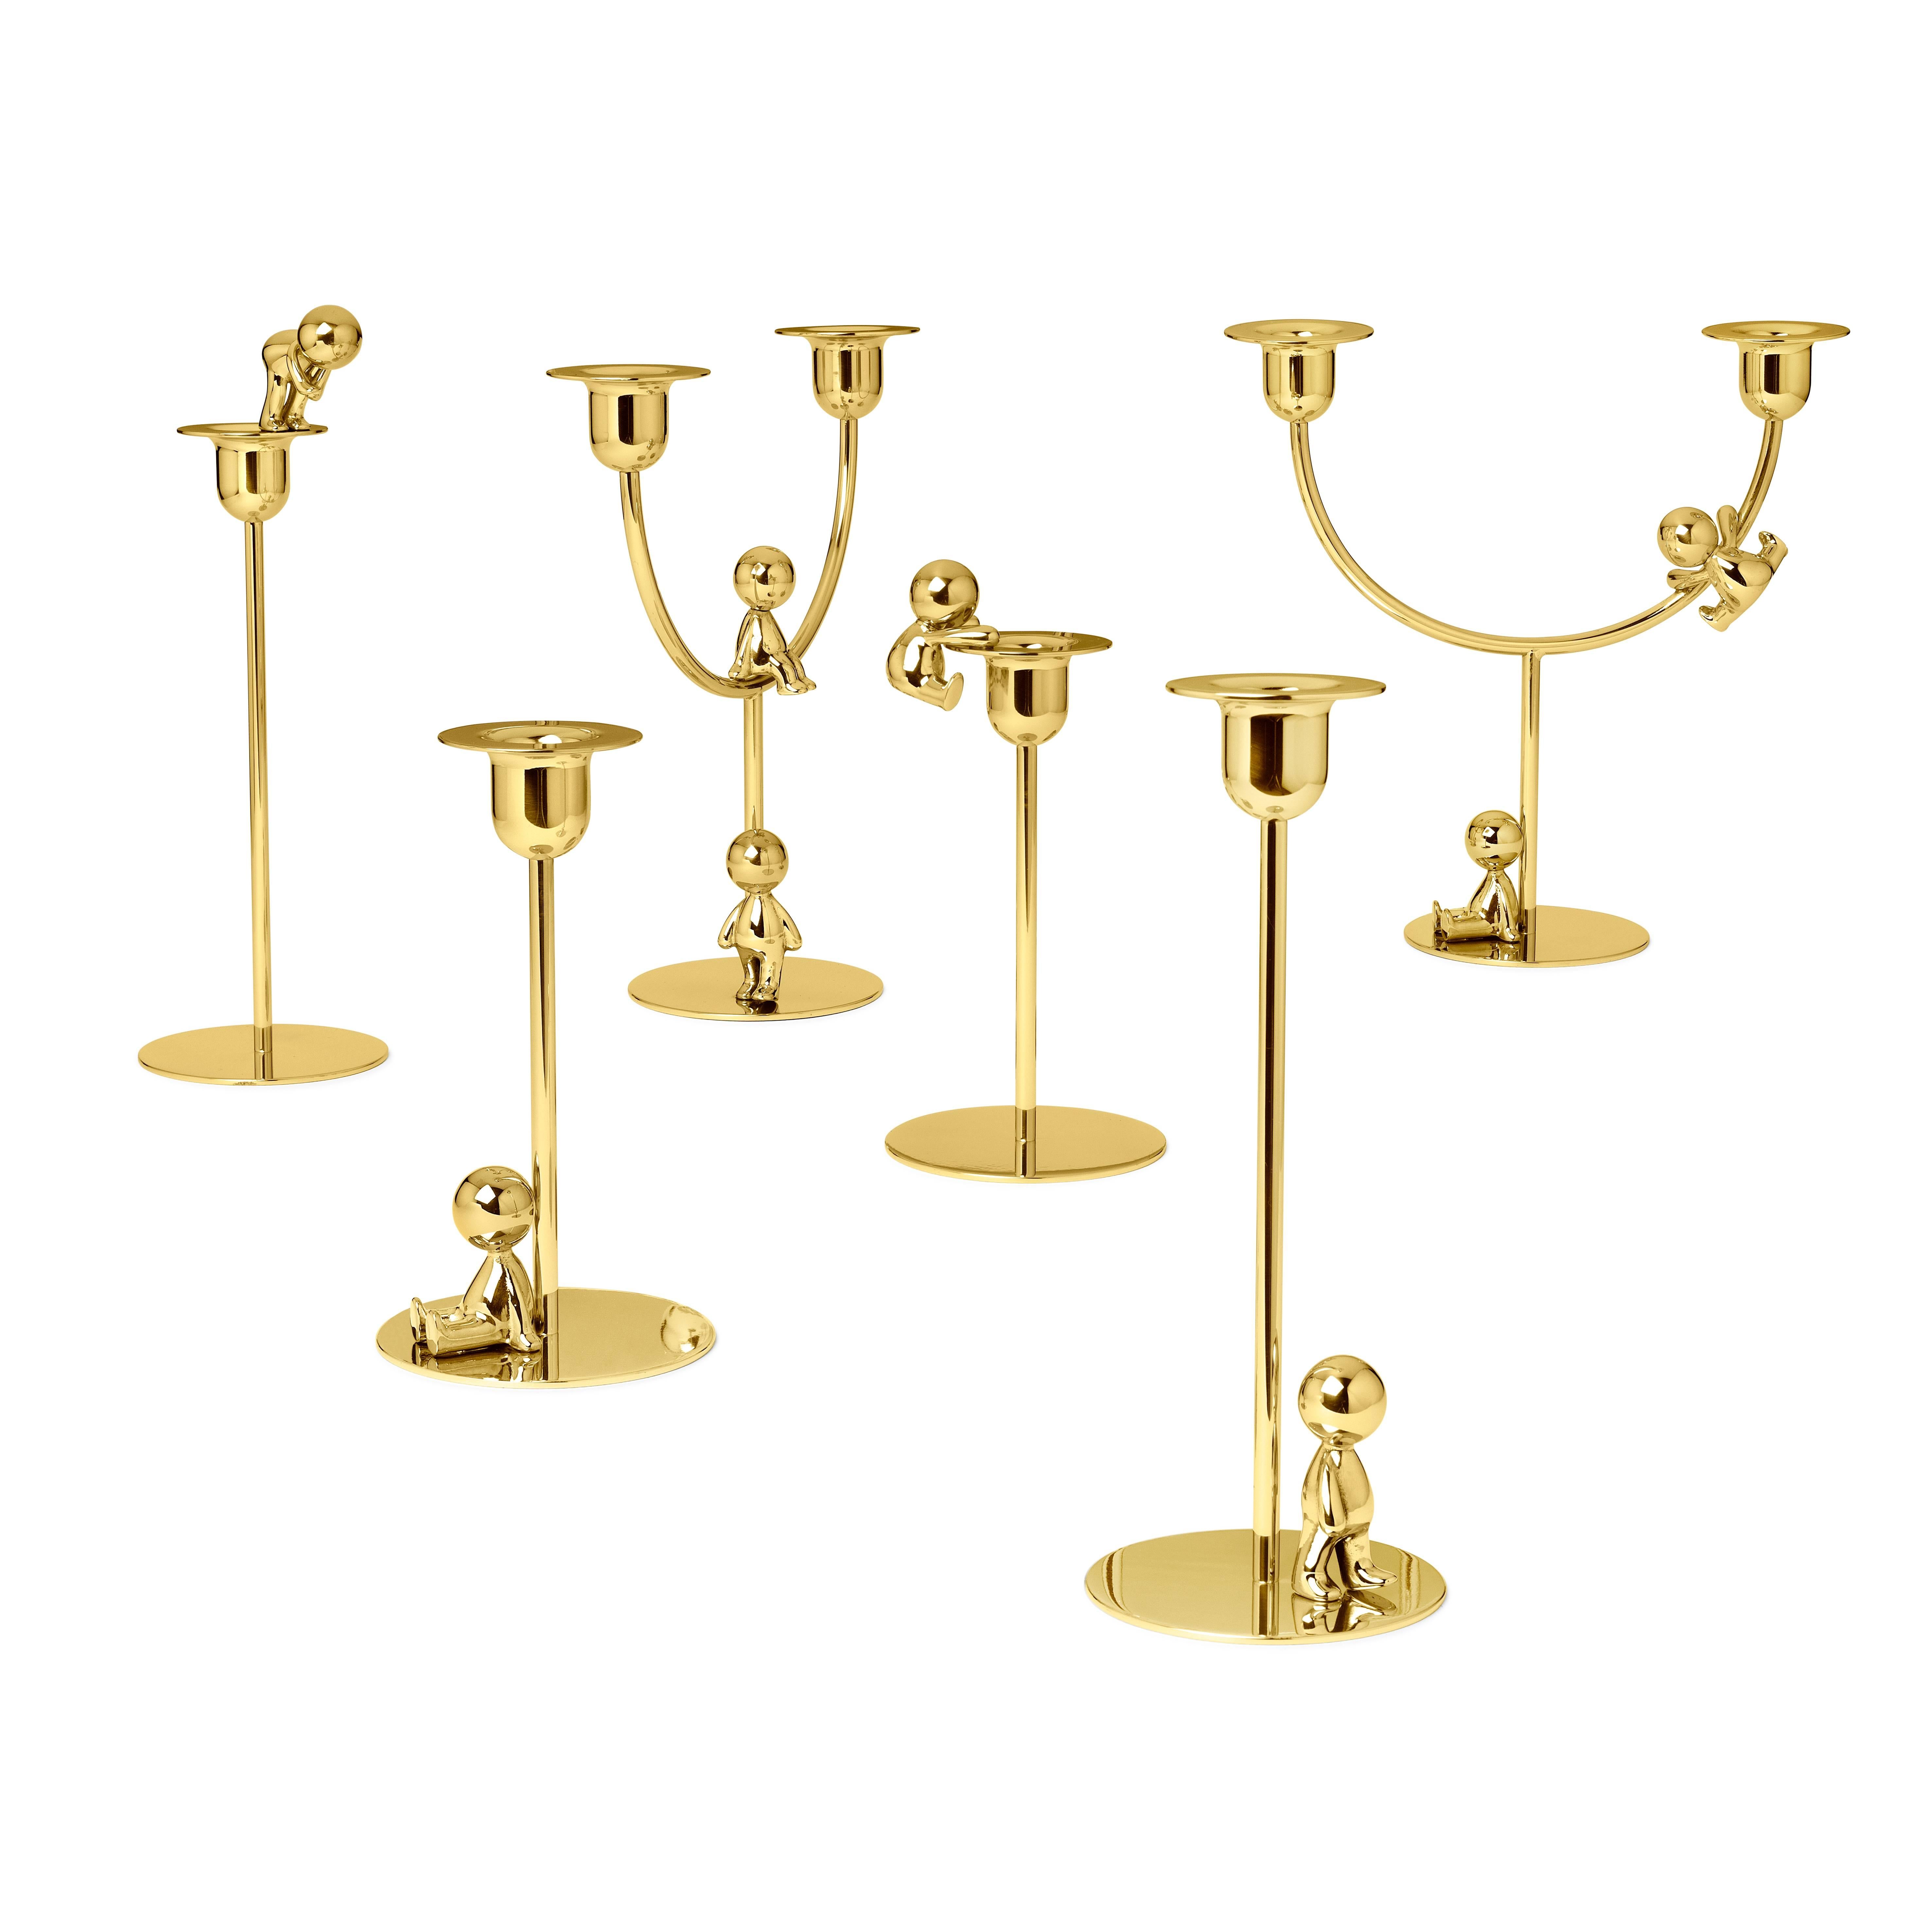 This delightful polished brass tall candlestick is a creative accent for any modern interior. The streamlined design features a flat base and a long column accented by a bulbed bobeche with a wide rim. A small, stylized man sits atop the bobeche,